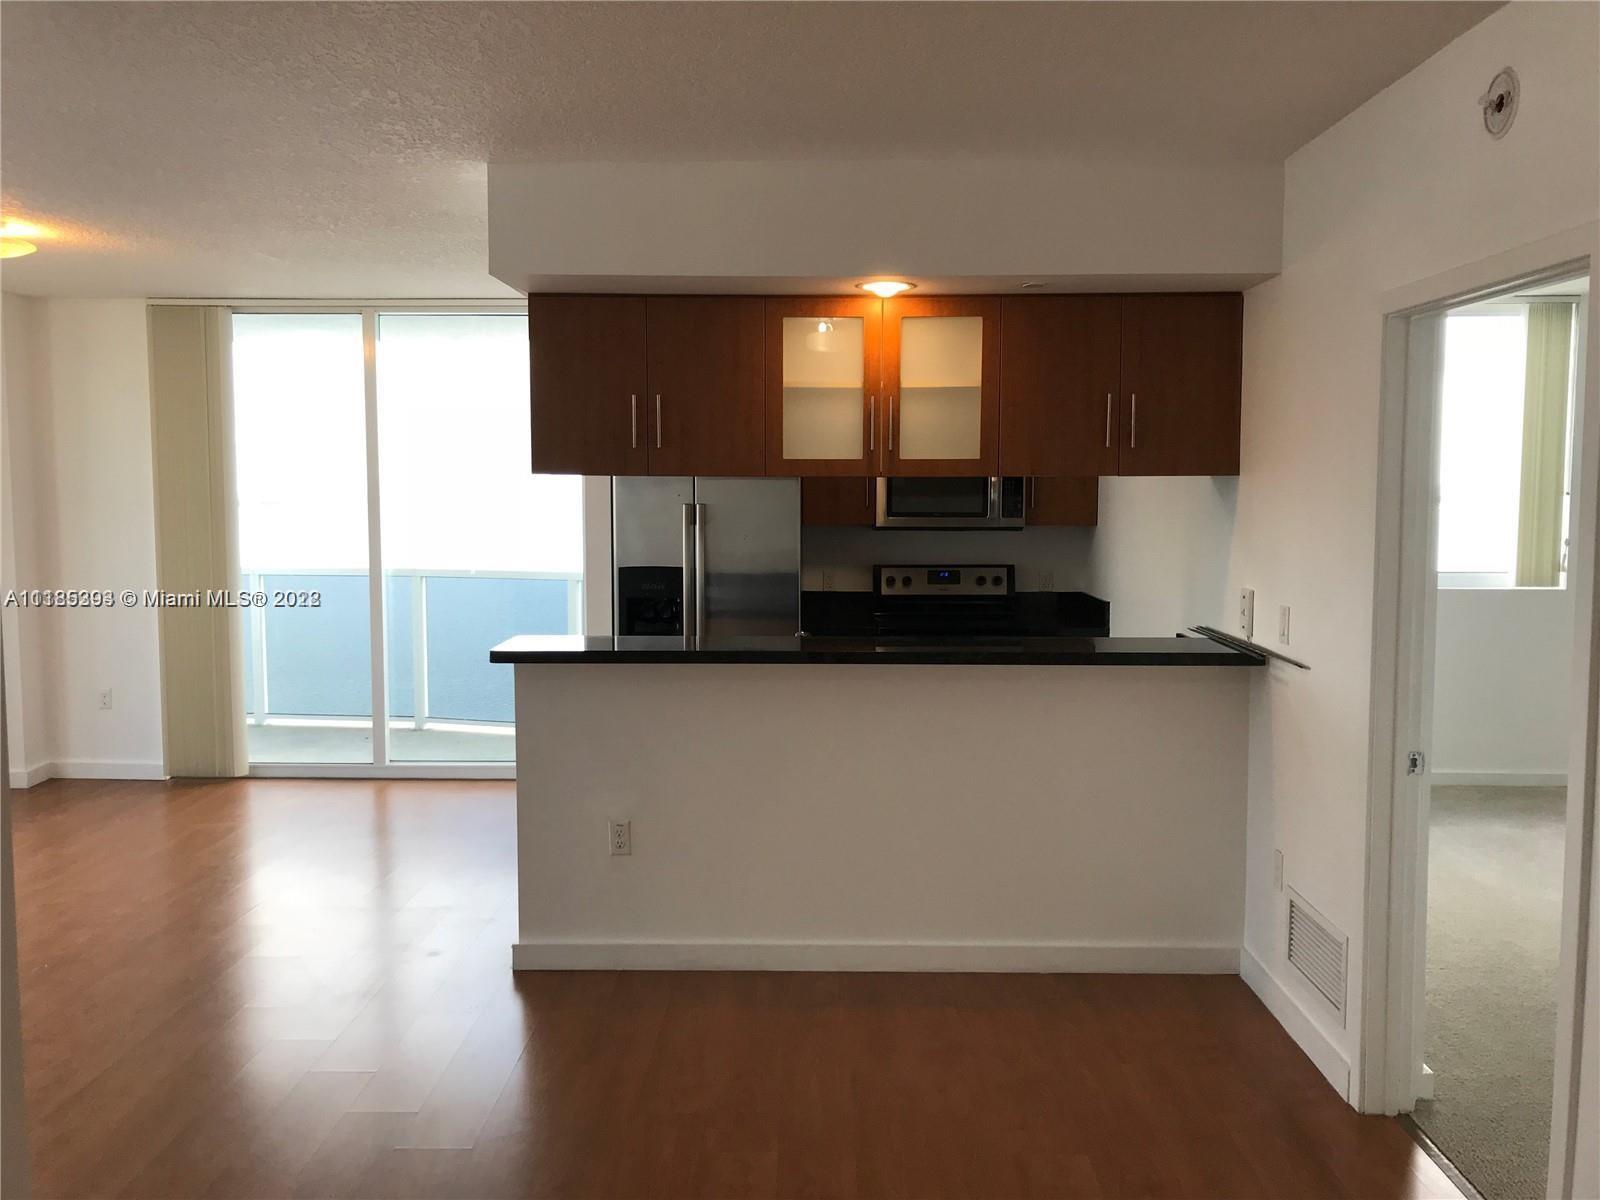 VERY LARGE 3 BEDROOM UNIT AT 23 BISCAYNE CONDO, AMAZING OCEAN VIEW FROM THE BALCONY, CONDO HAS A GRE